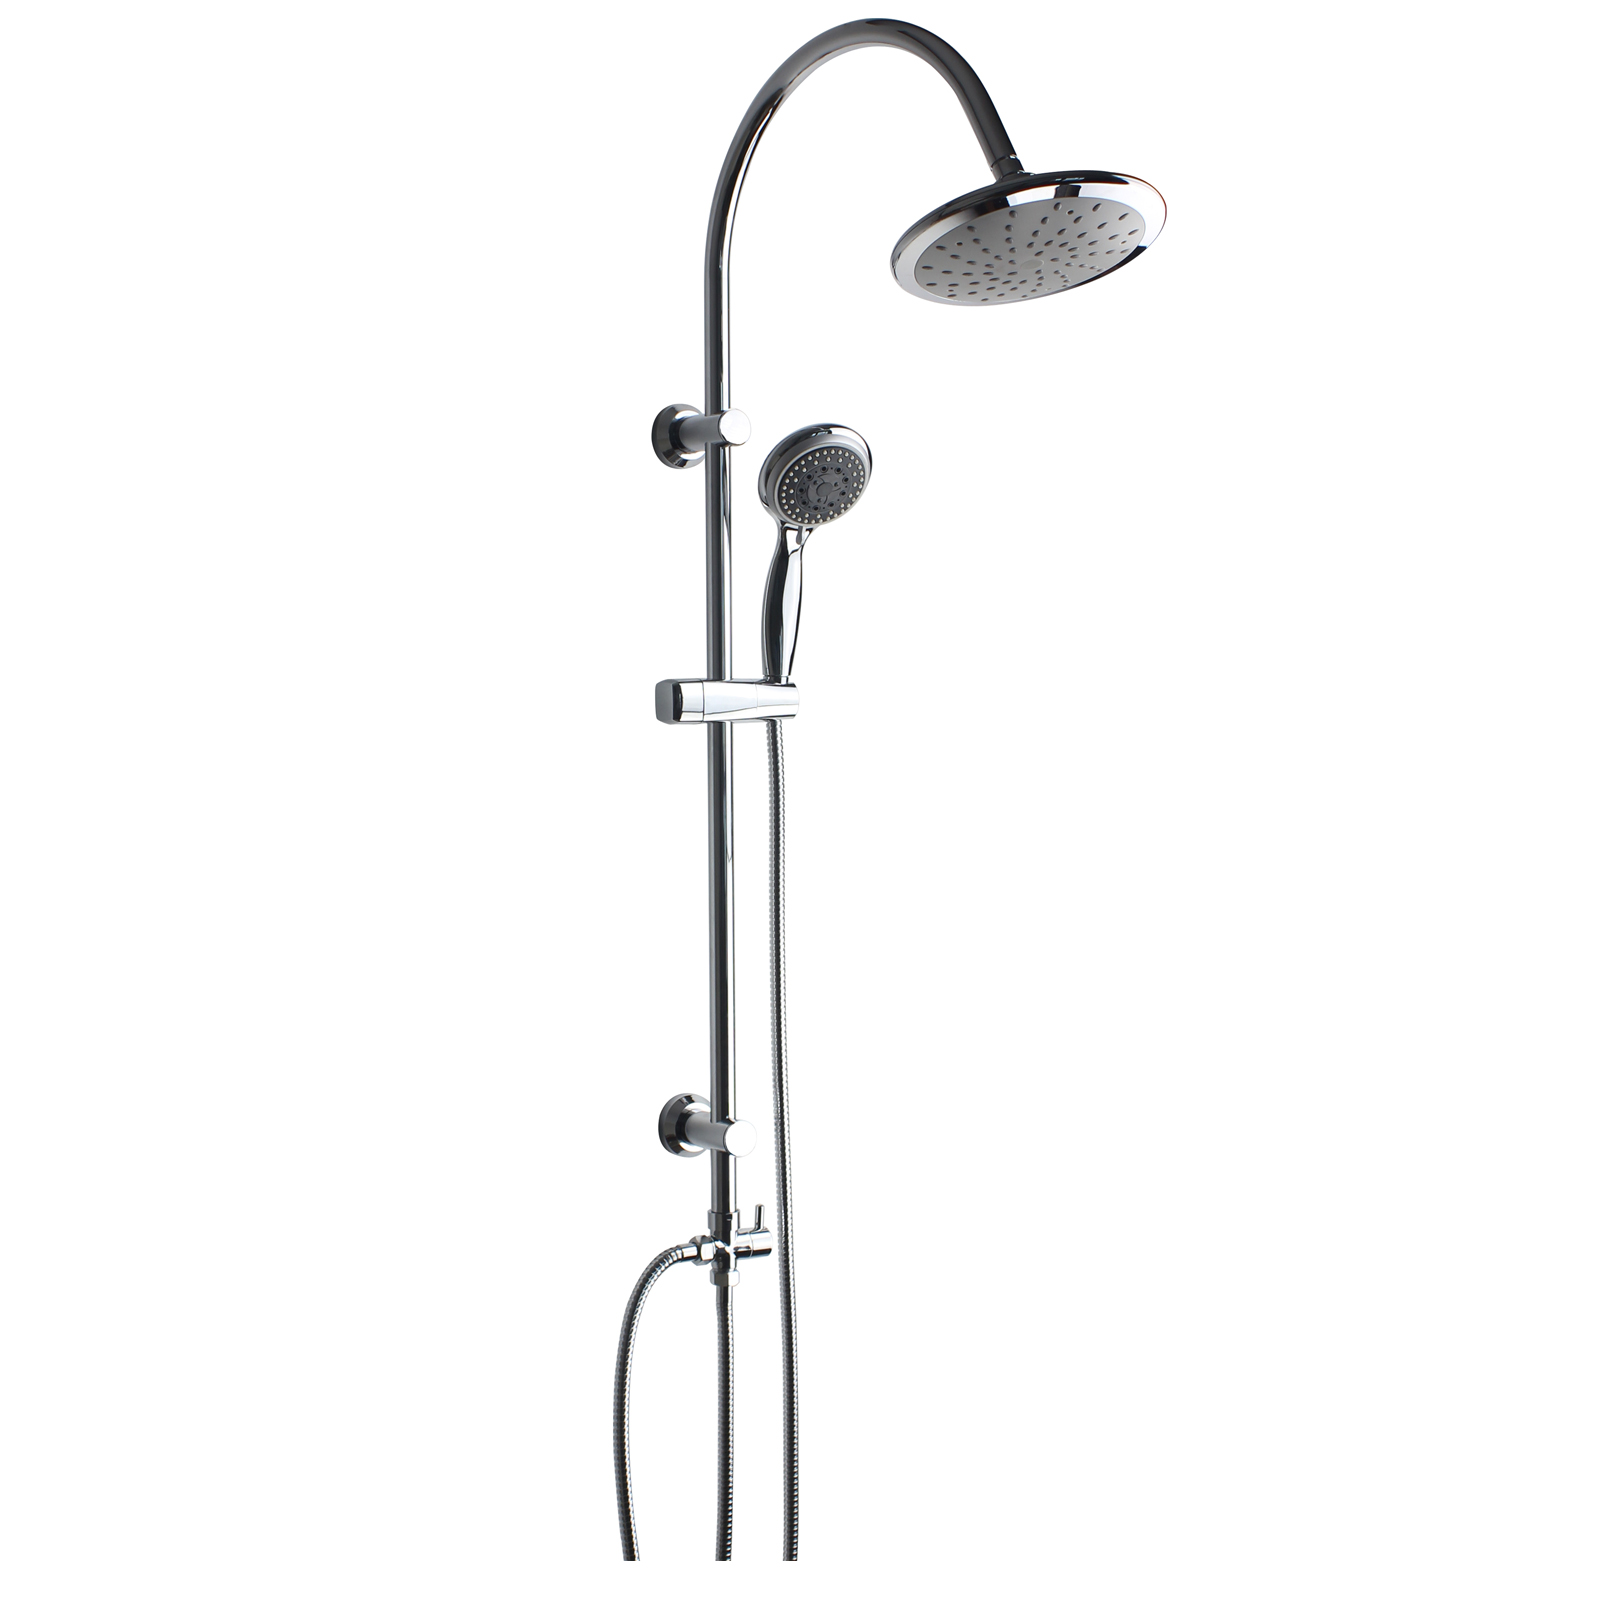 Telescopic shower column with automatic diverter and wall bracket, with shower rose and self cleaning hand shower